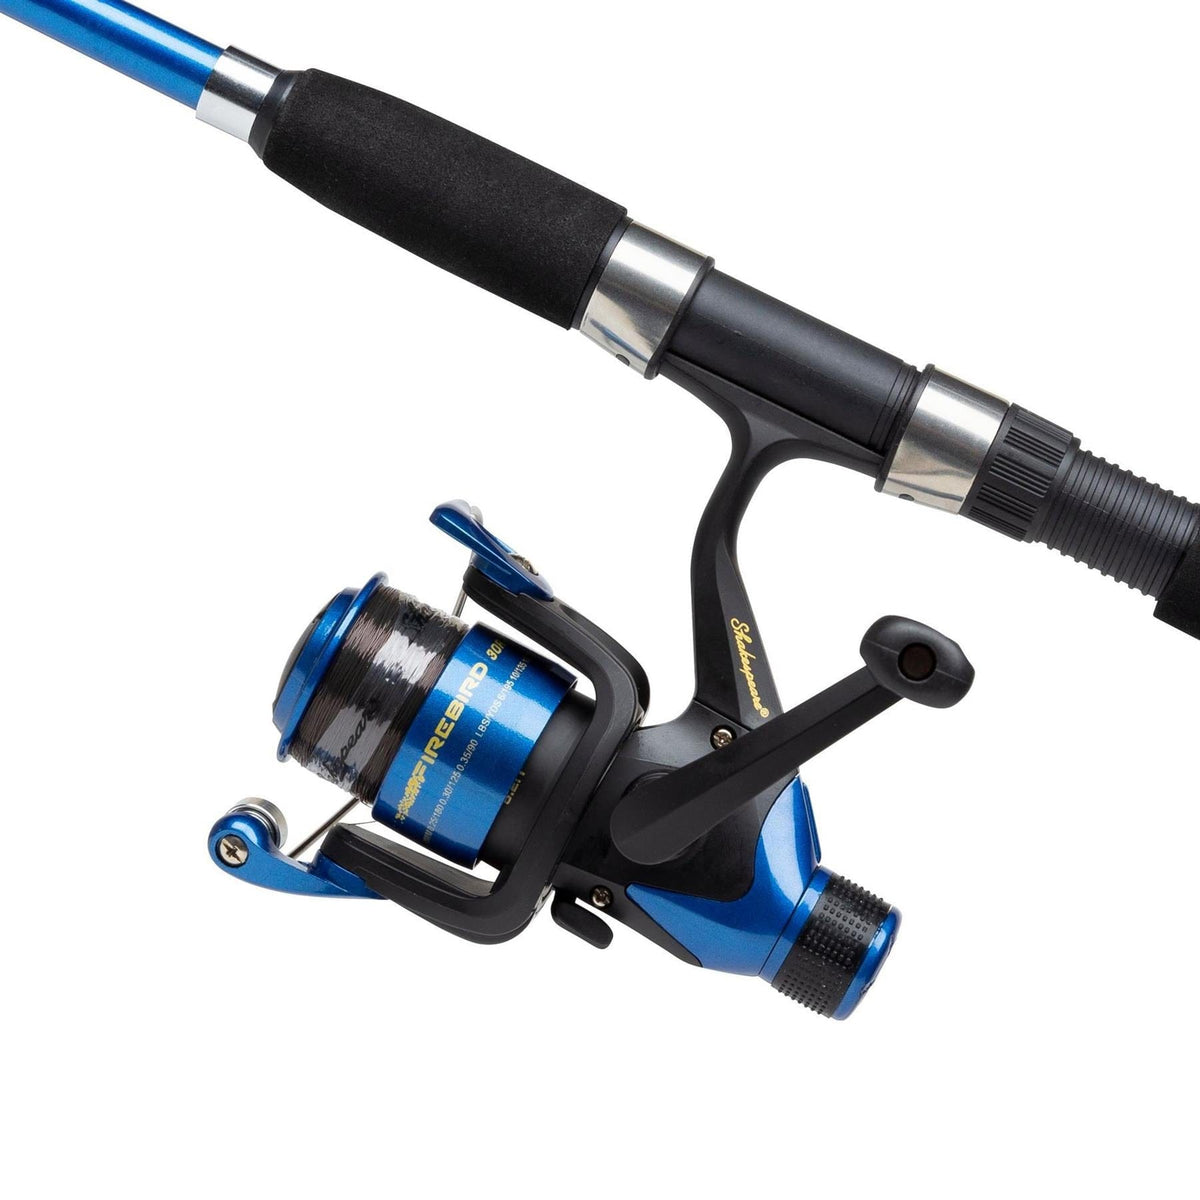 Shakespeare Firebird Tele Spin Combo Rod and Reel with Line - 9ft - 15-40g NEW